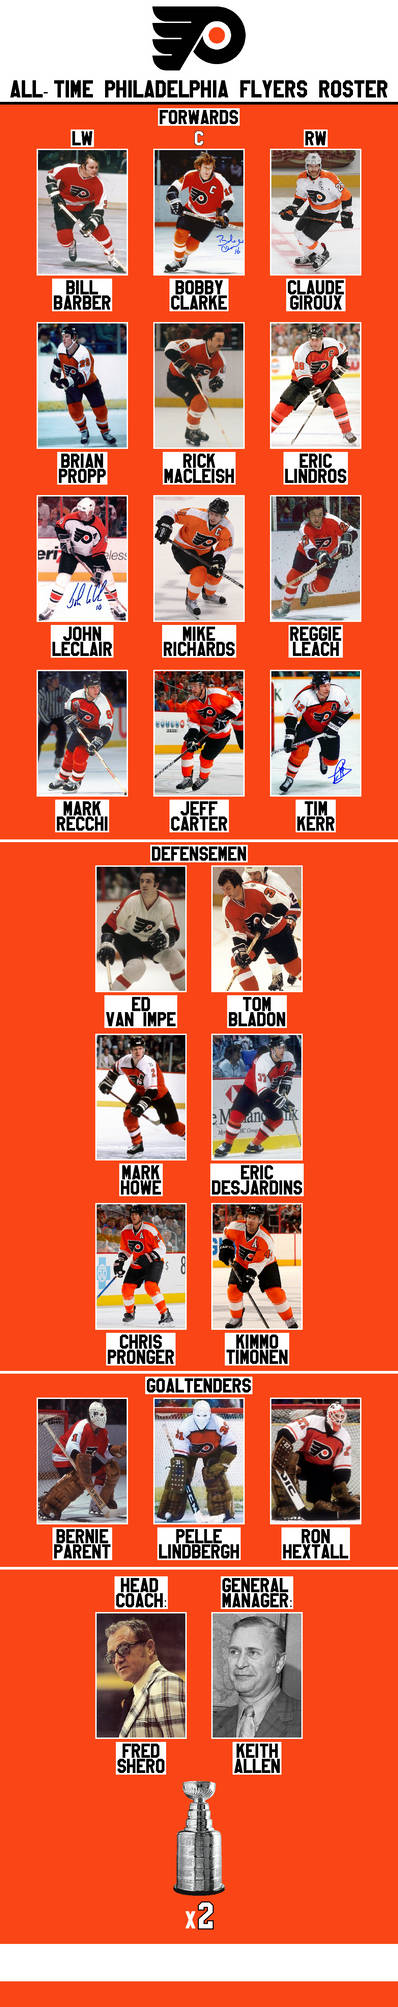 All-time Washington Capitals roster by JackHammer86 on DeviantArt